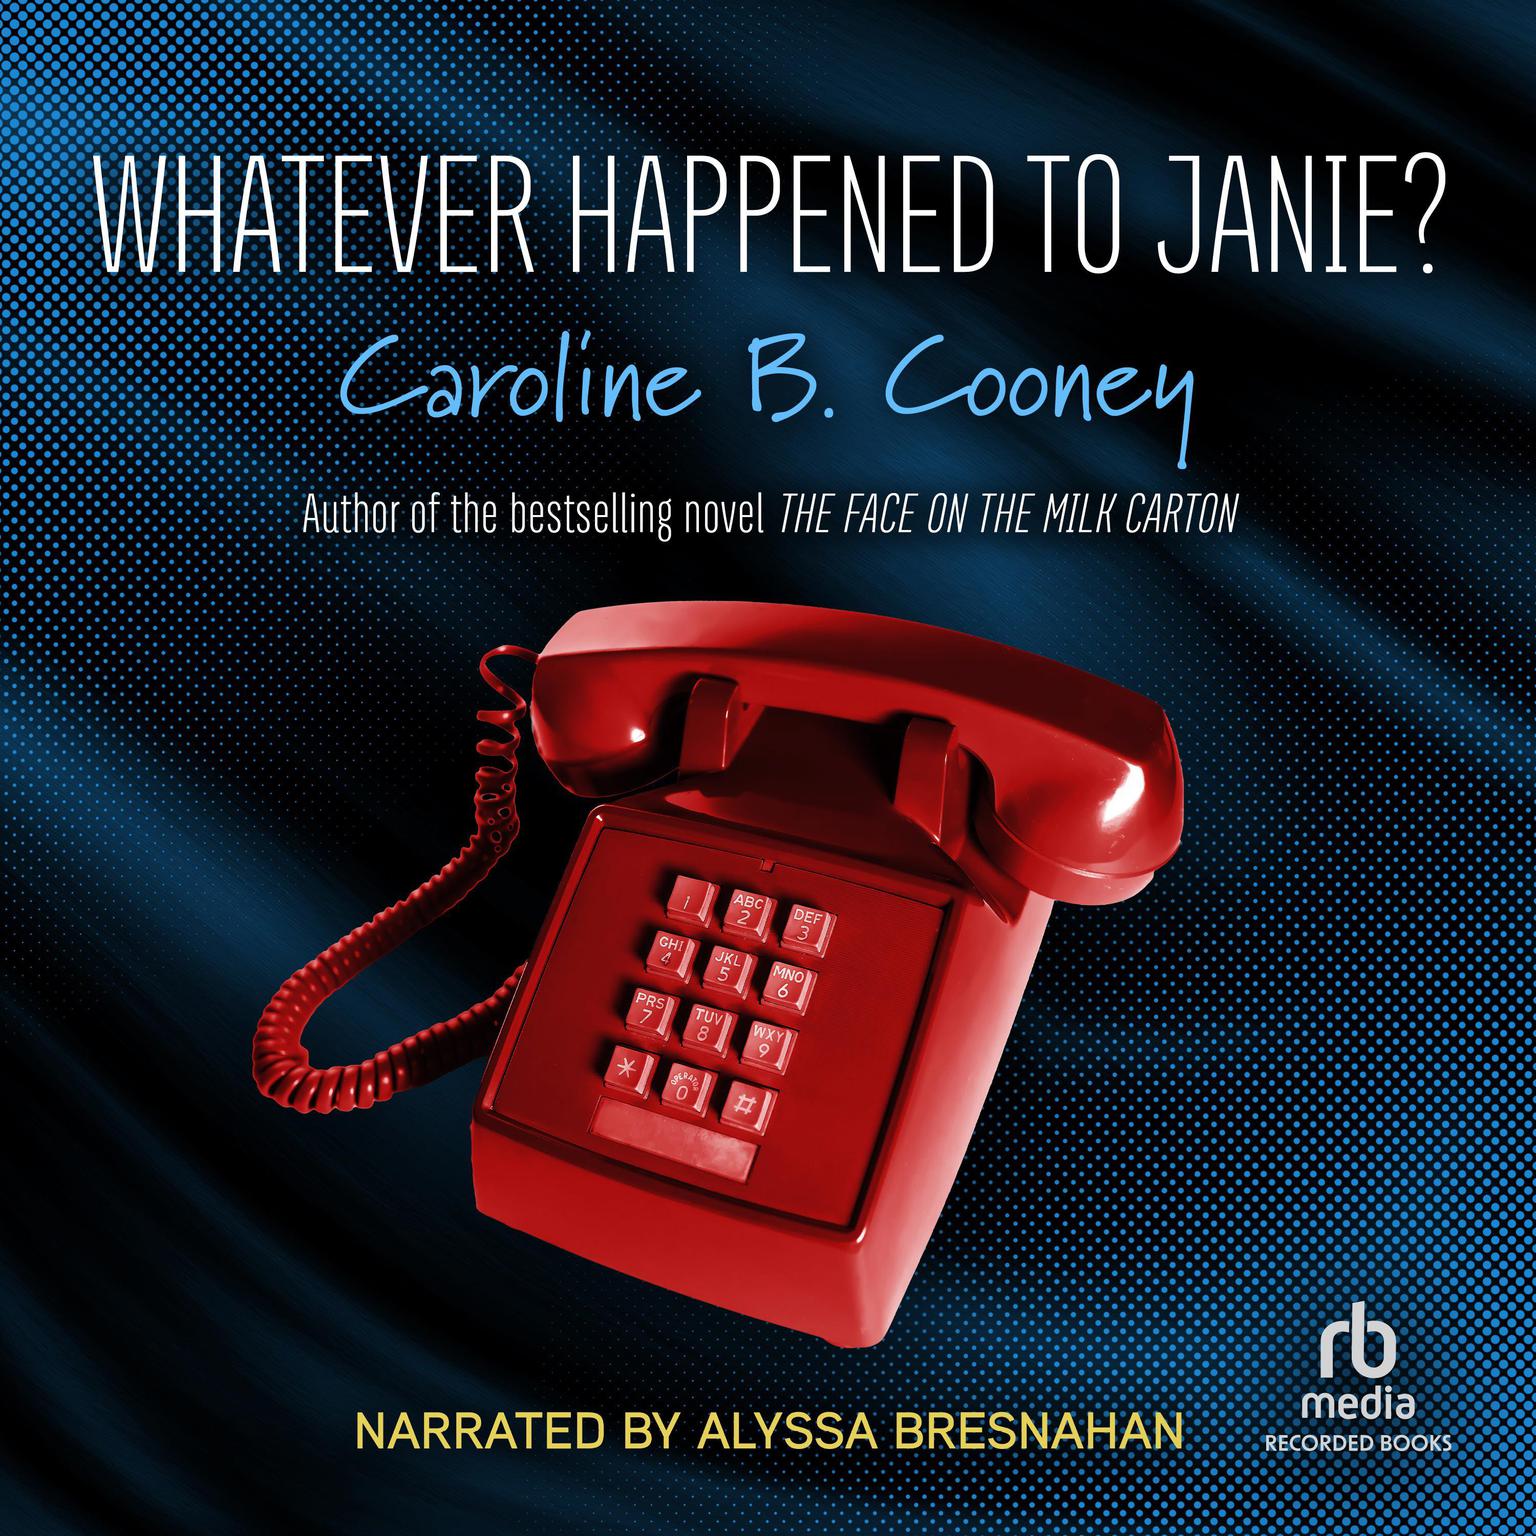 Whatever Happened to Janie? Audiobook, by Caroline B. Cooney